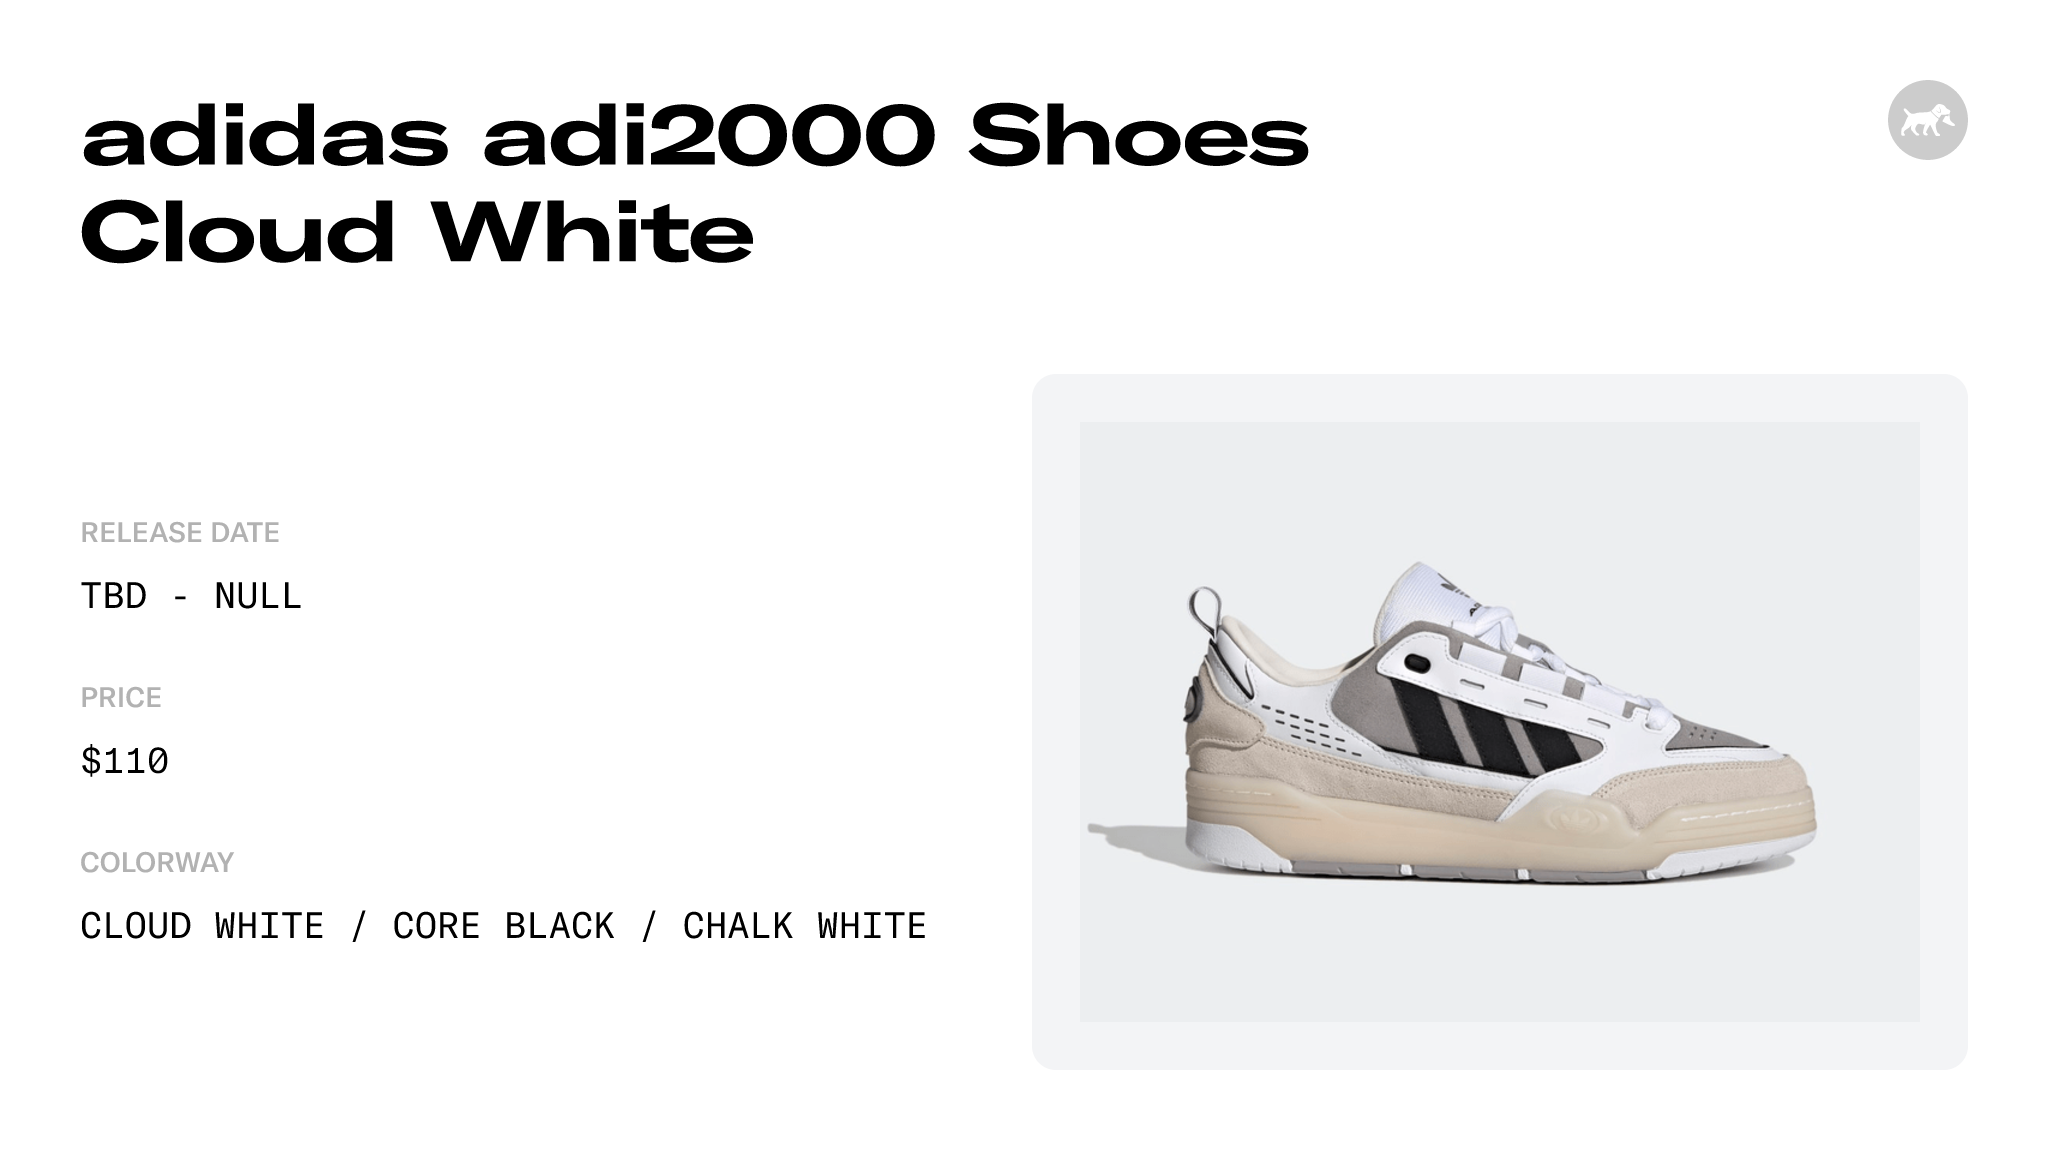 GV9544 and Raffles adi2000 - Shoes Release adidas Date Cloud White